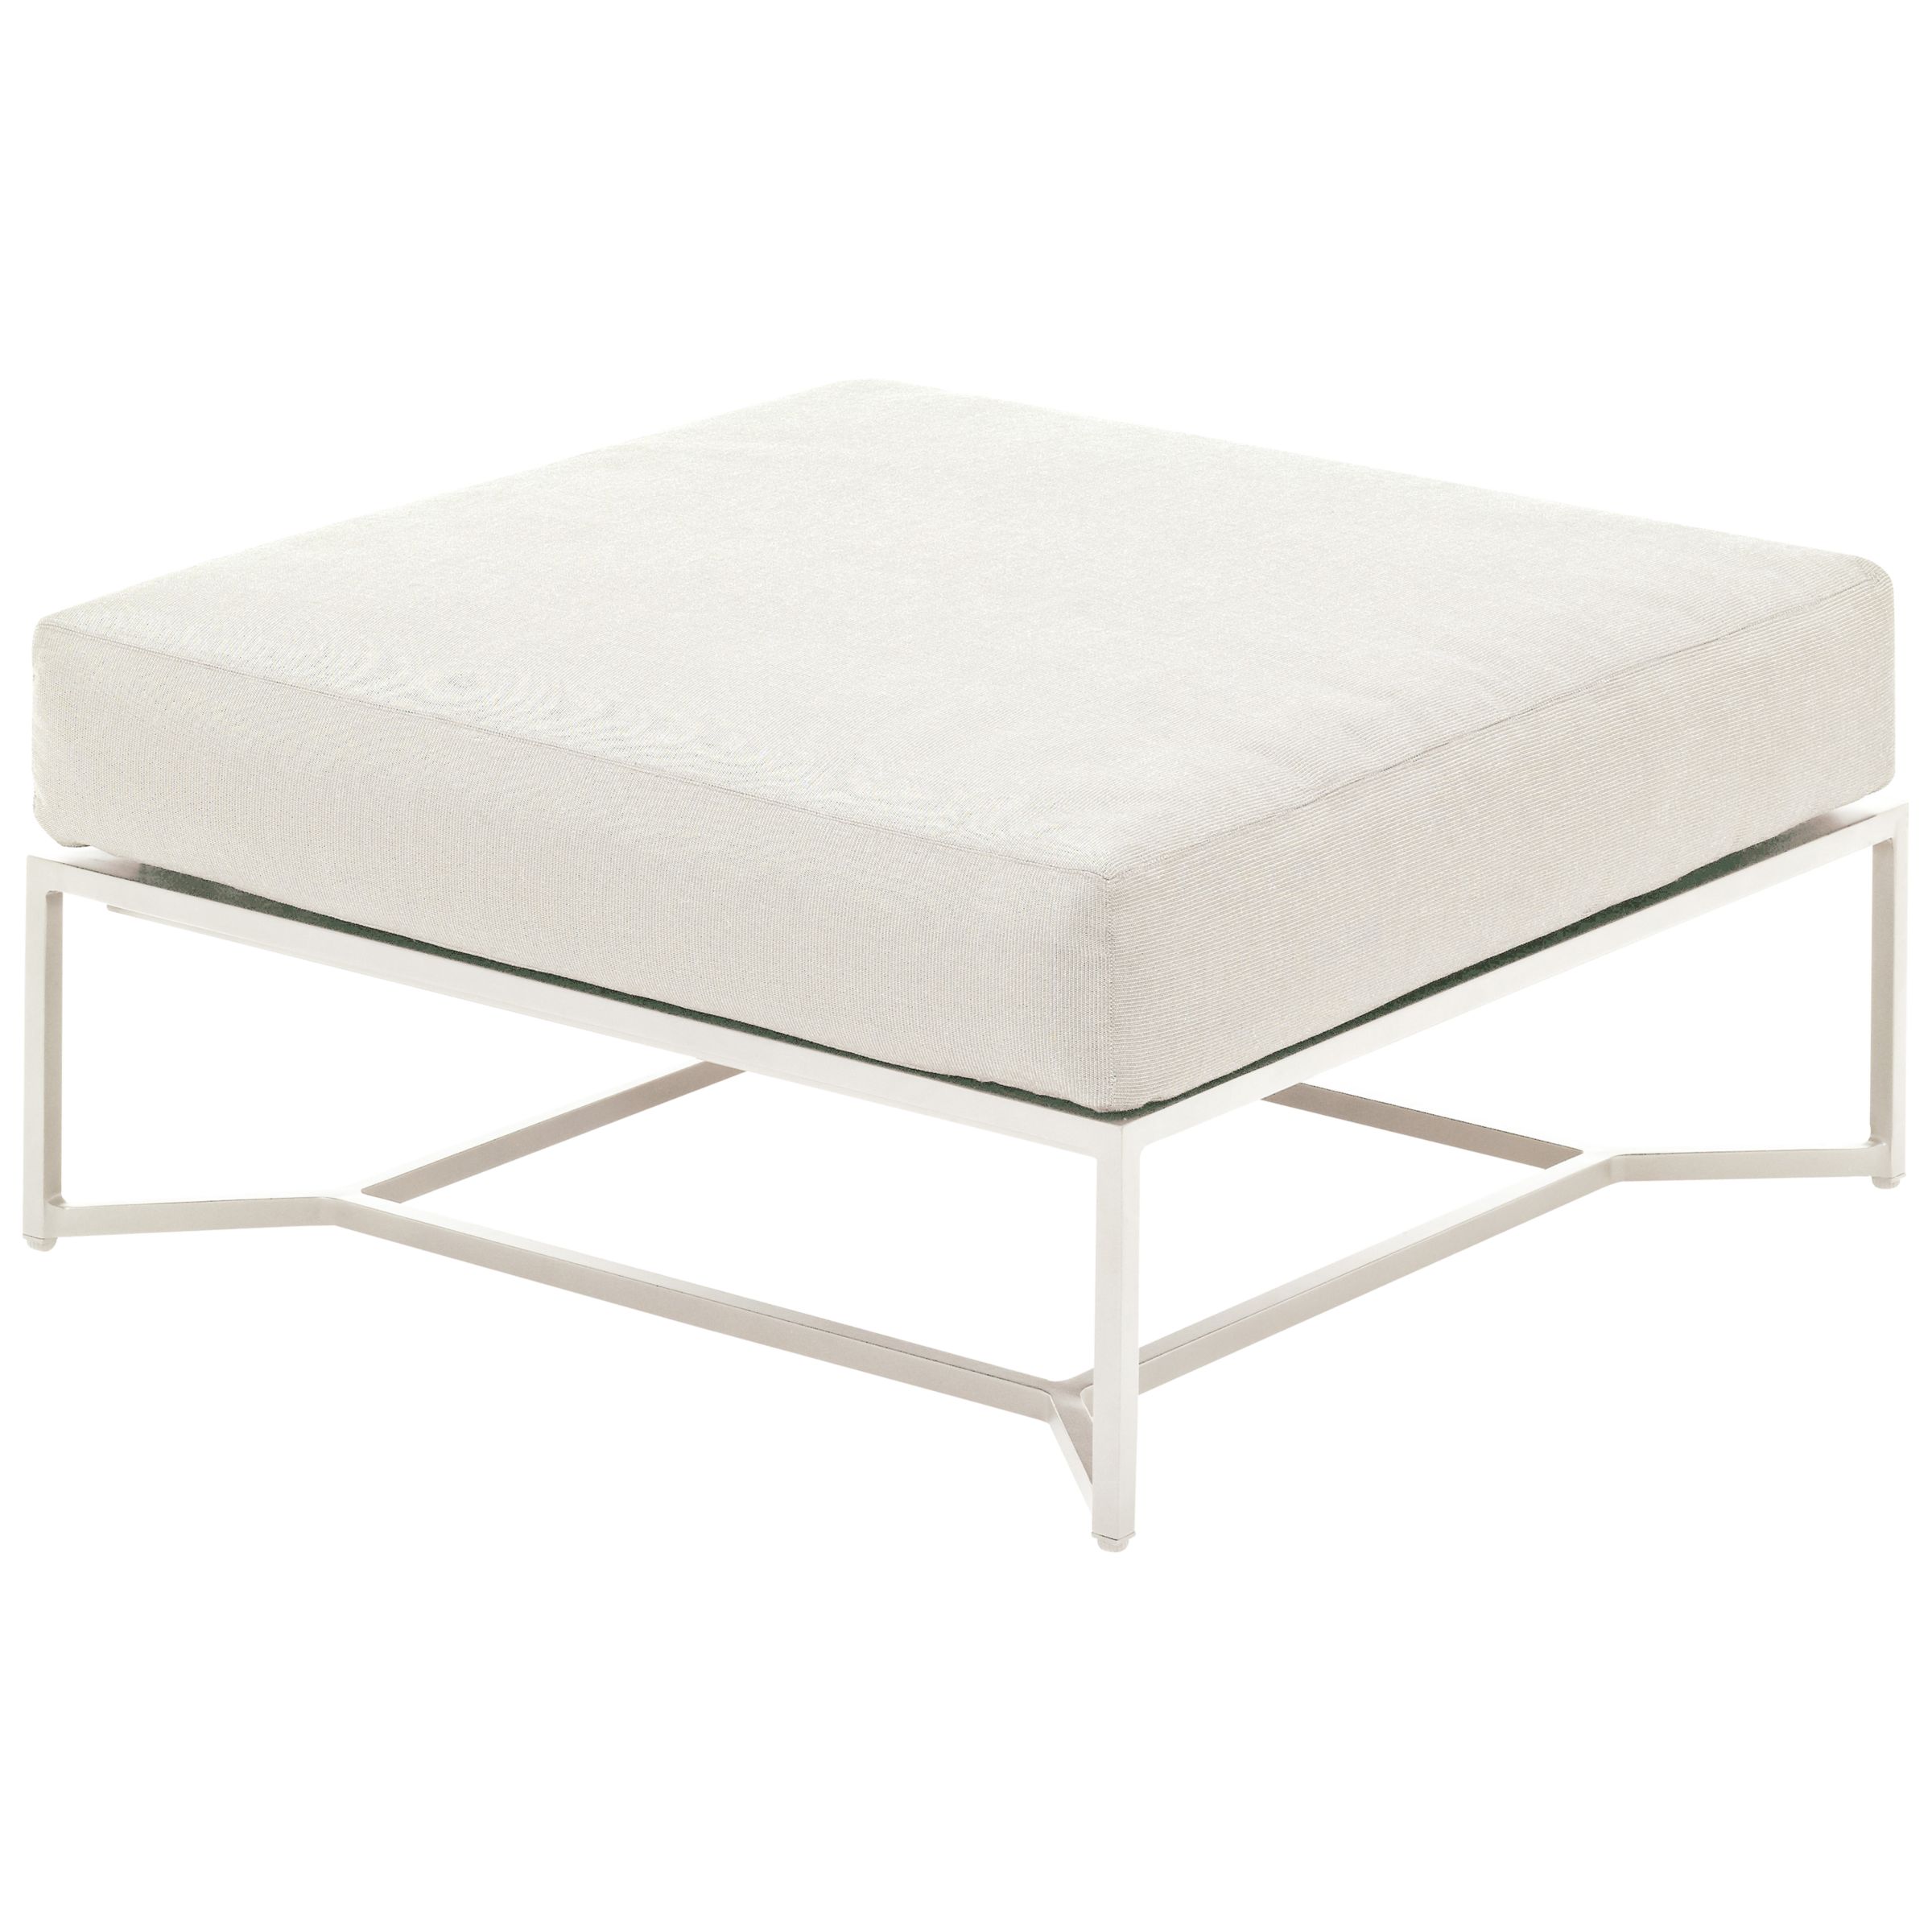 Gloster Bloc Outdoor Ottoman, White / Ivory